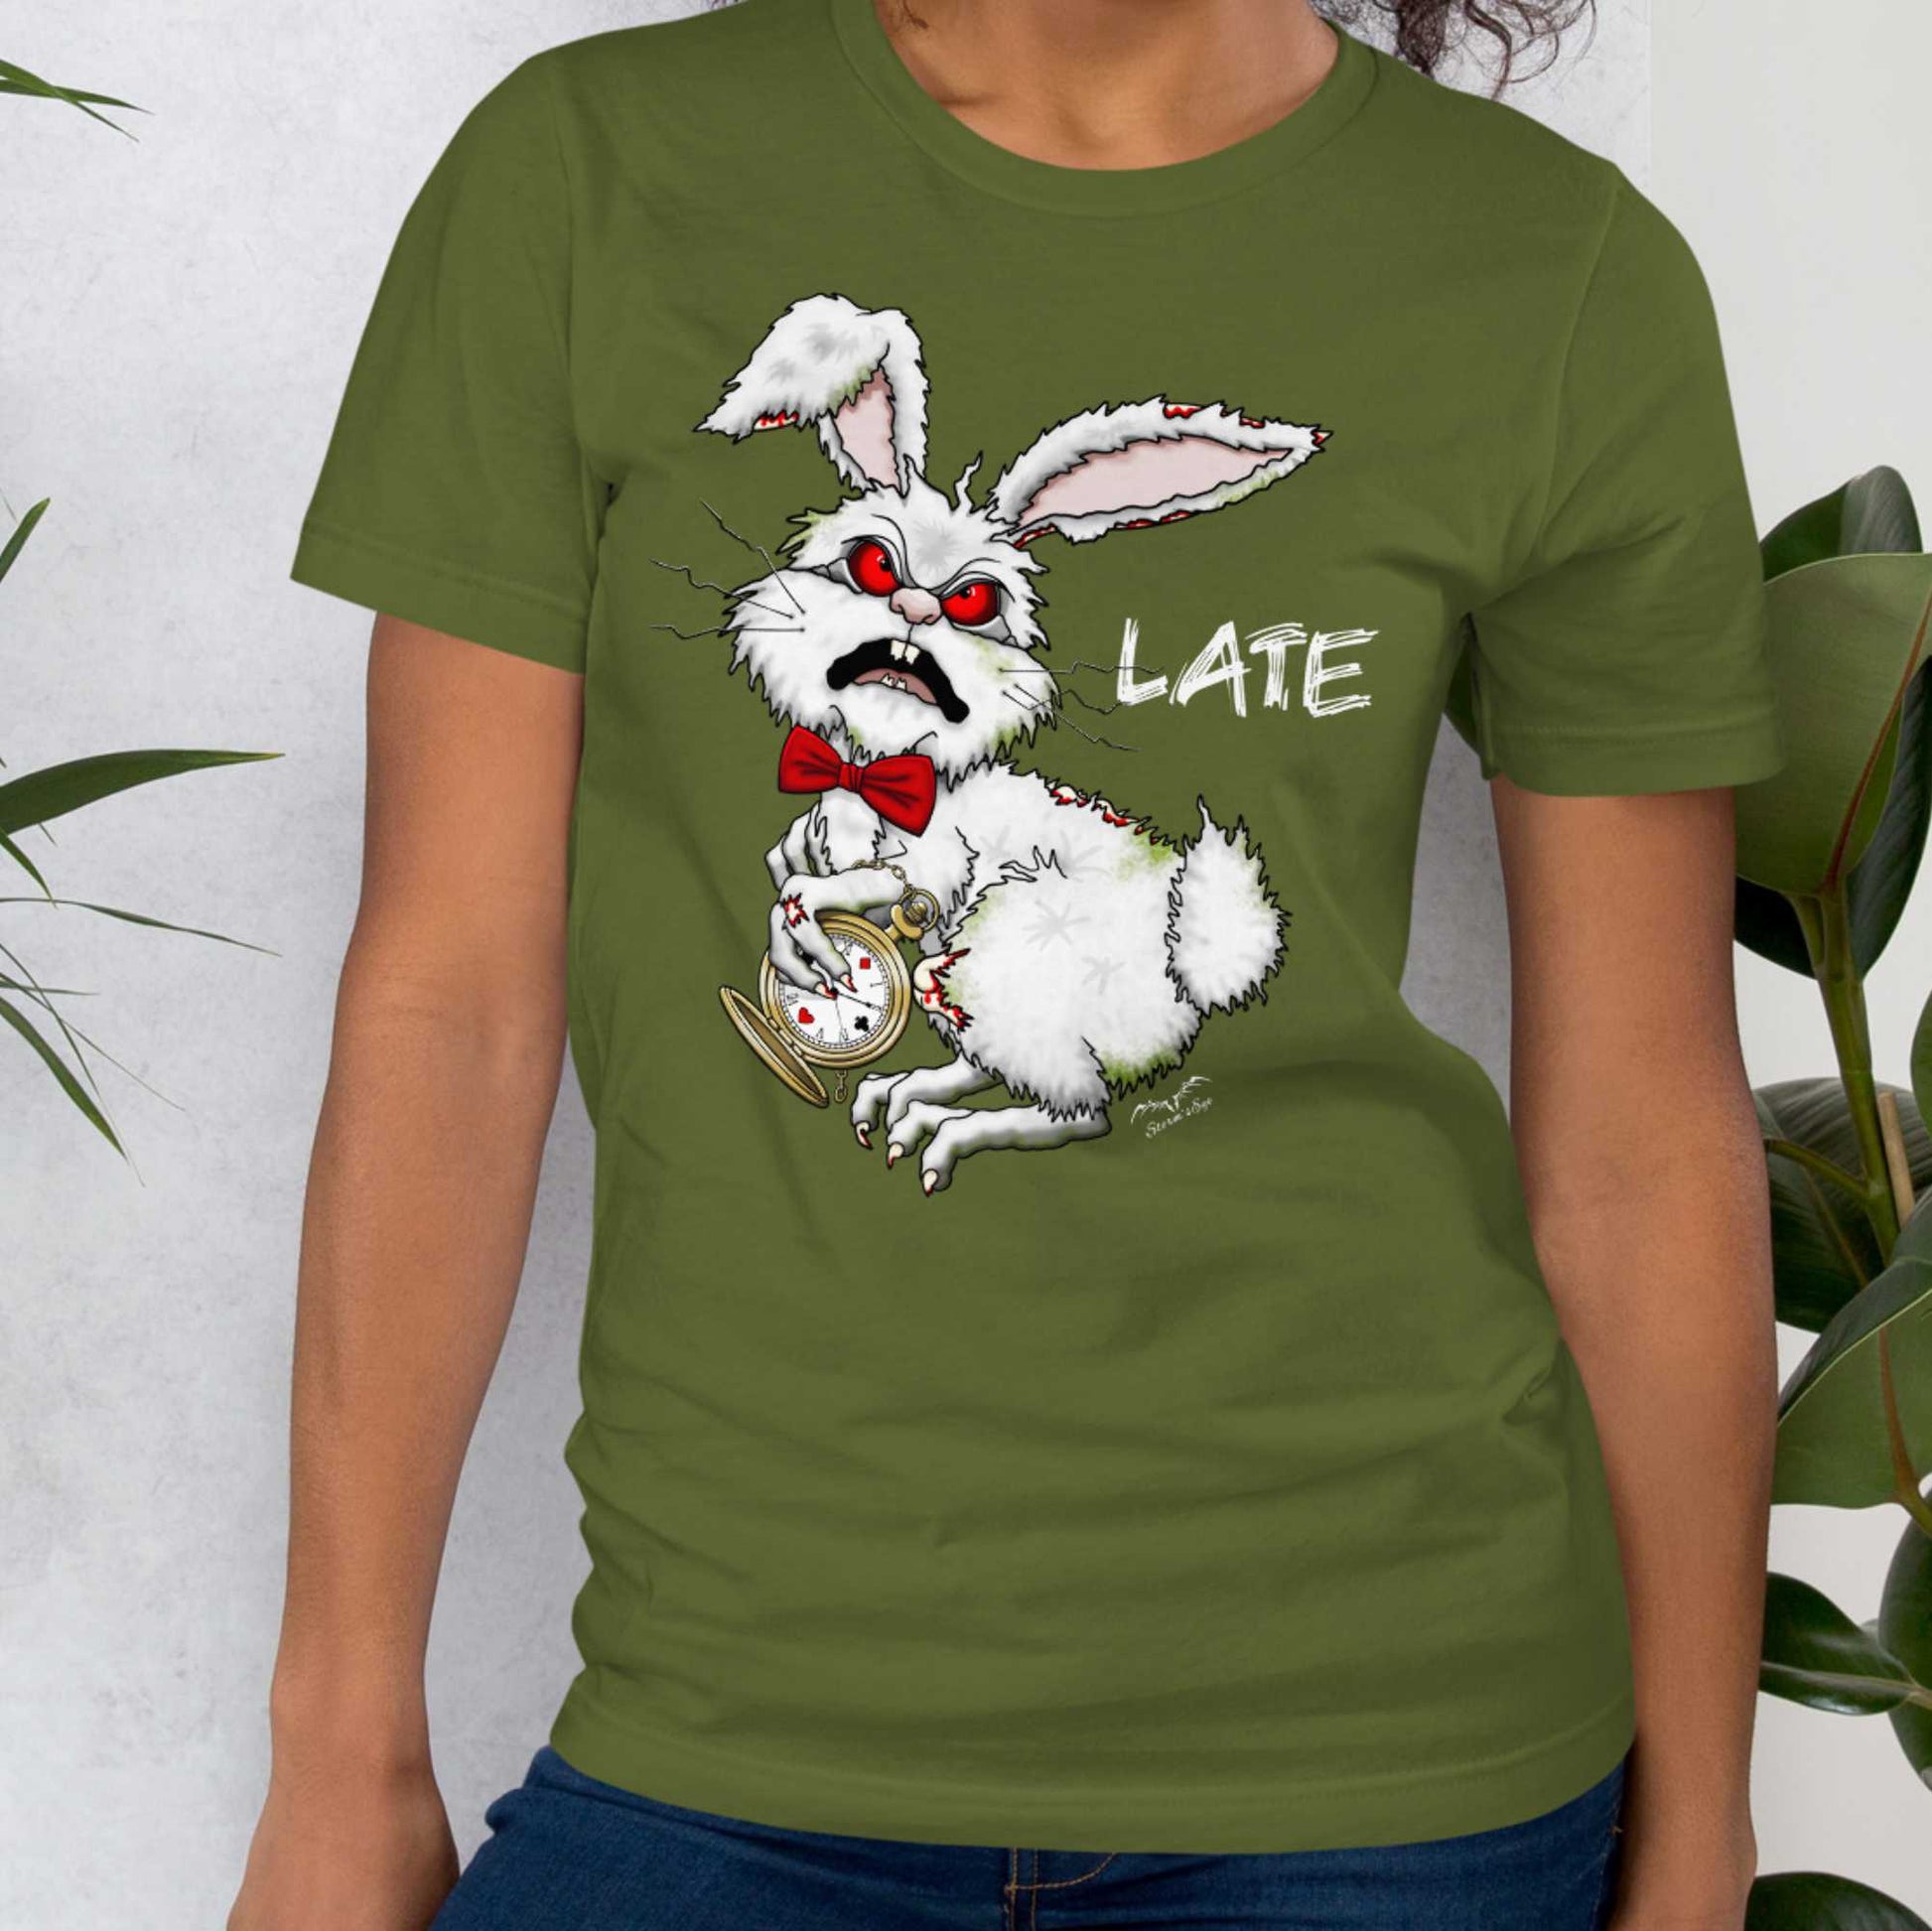 Stormseye Design zombie bunny t shirt, modelled view olive green